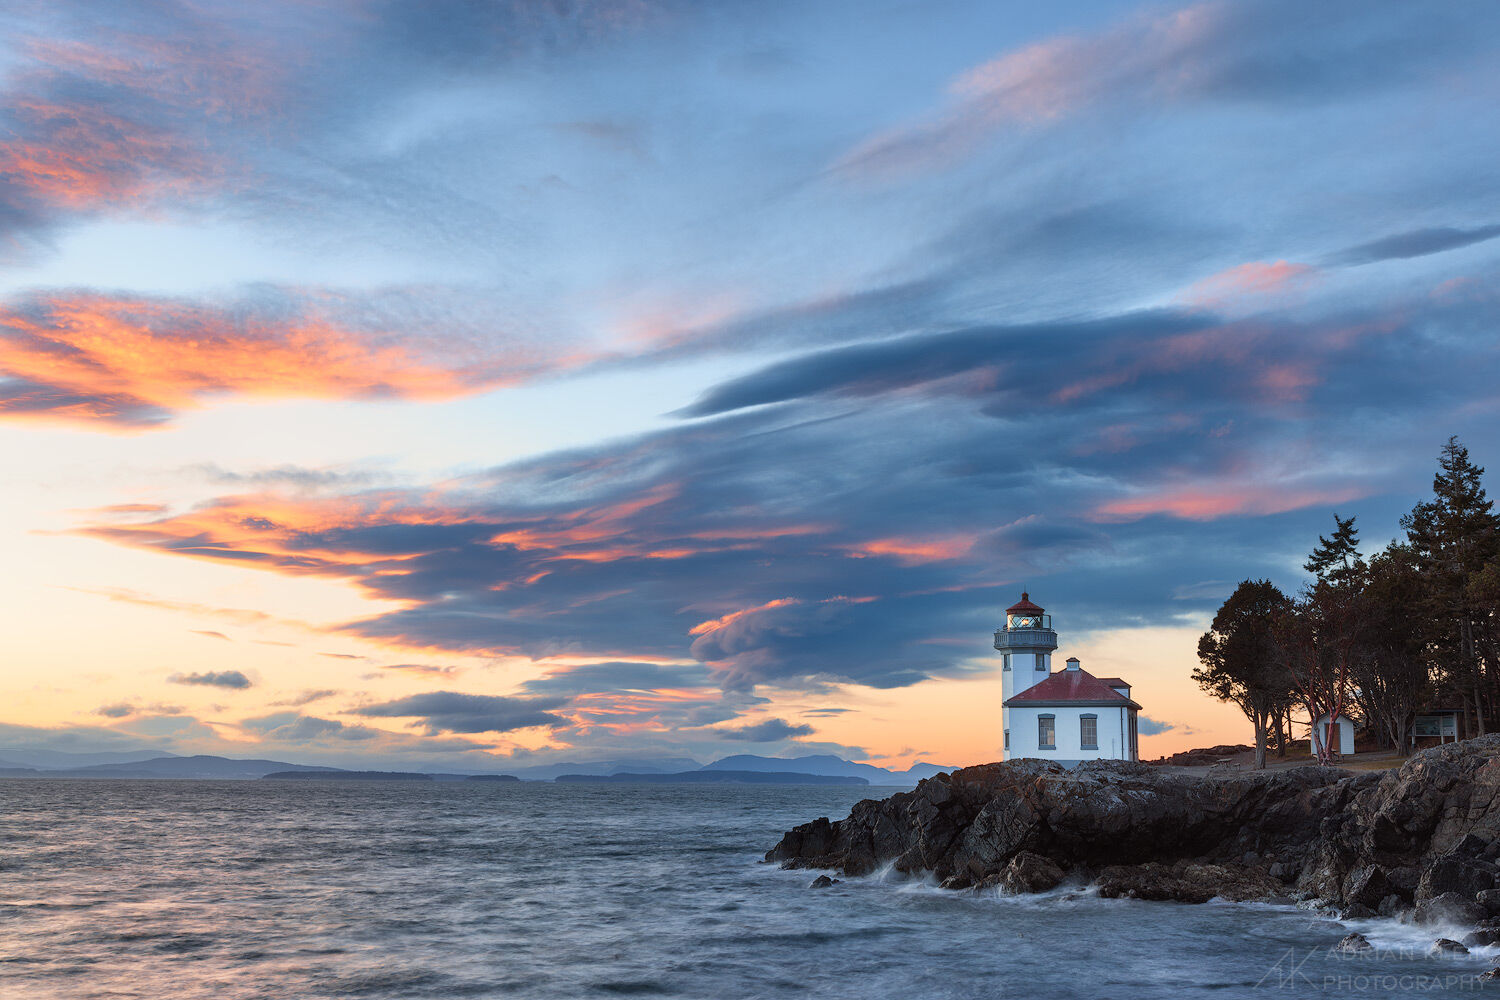 Lighthouse as the sunset sky glows at Lime Kiln Point State Park in Washington San Juan Islands